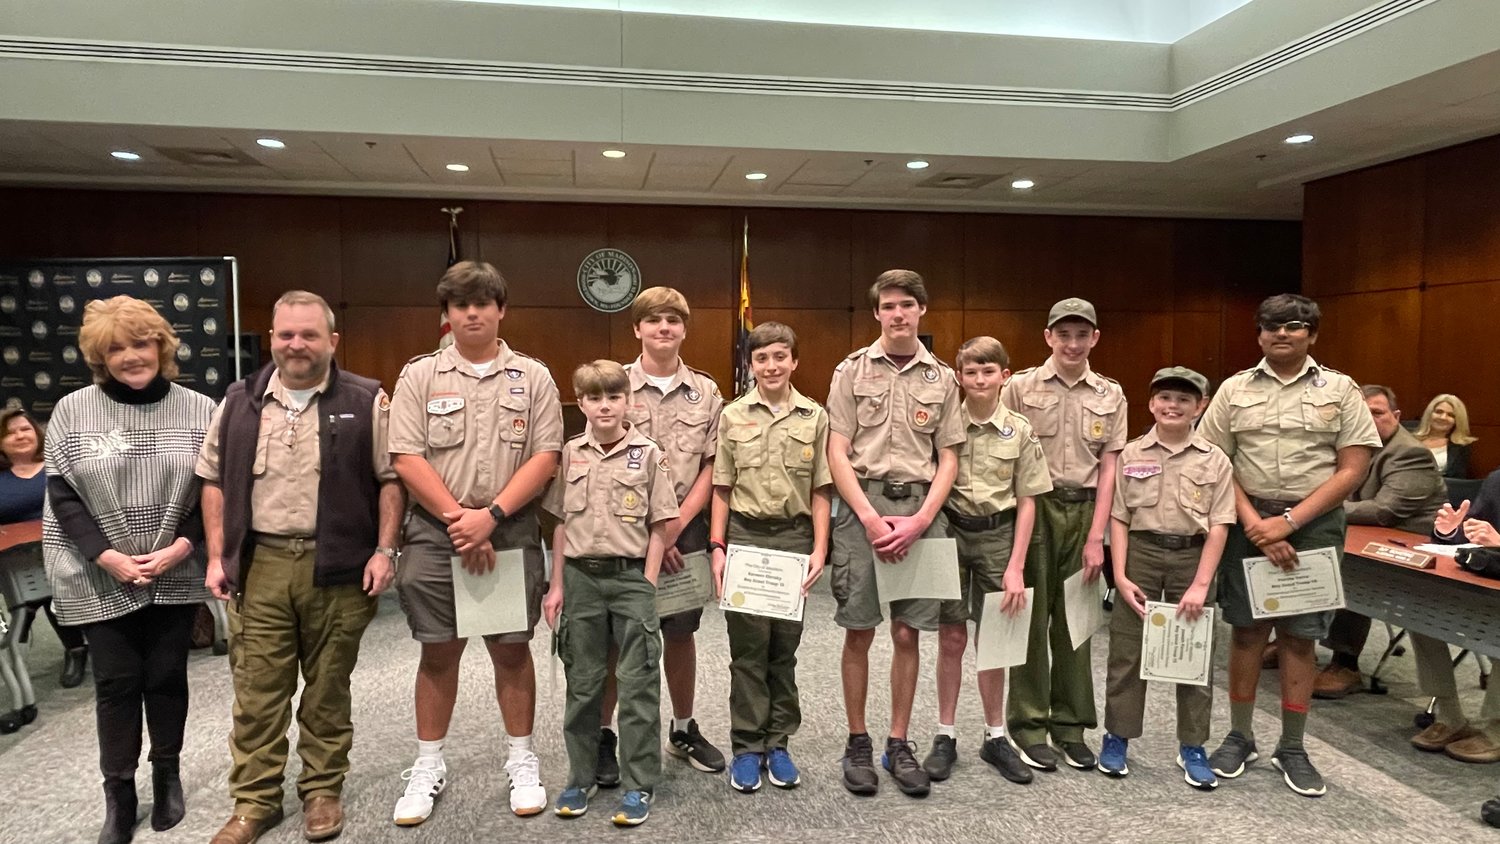 Boy Scout Troop 15 in Madison was recognized for their work on the Simmons Arboretum bridge, led by Life Scout Wilson Caudell. Each scout present received a certificate of appreciation from the city. Pictured, from left: Mayor Mary Hawkins Butler, Scoutmaster Matthew Thompson, Wilson Caudell, Henry Barnett, Jacob Caudell, Kareem Elearky, Skylar Gentry, Henry Newkirk, James Parmely, Joseph Parmely, and Patha Yerra.